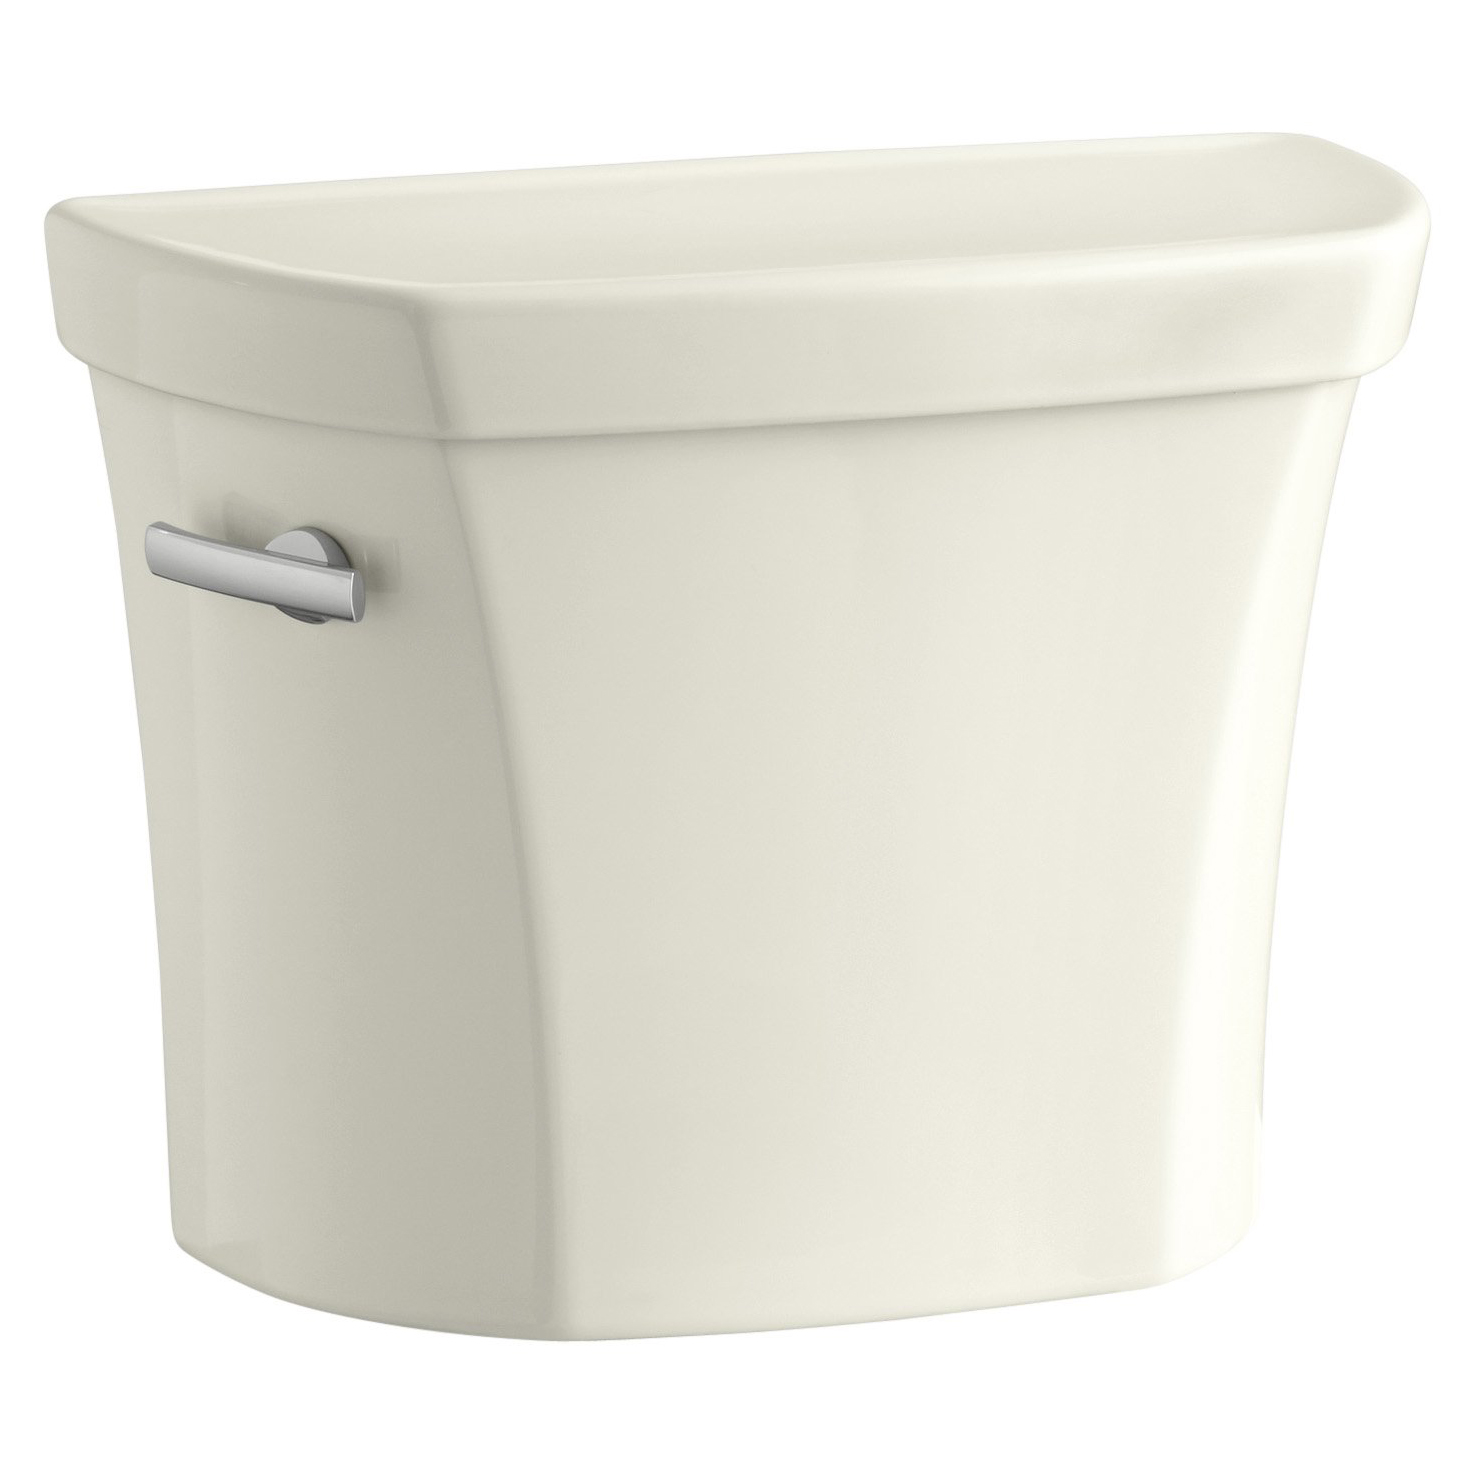 Wellworth 1.28 gpf Toilet Tank in Biscuit